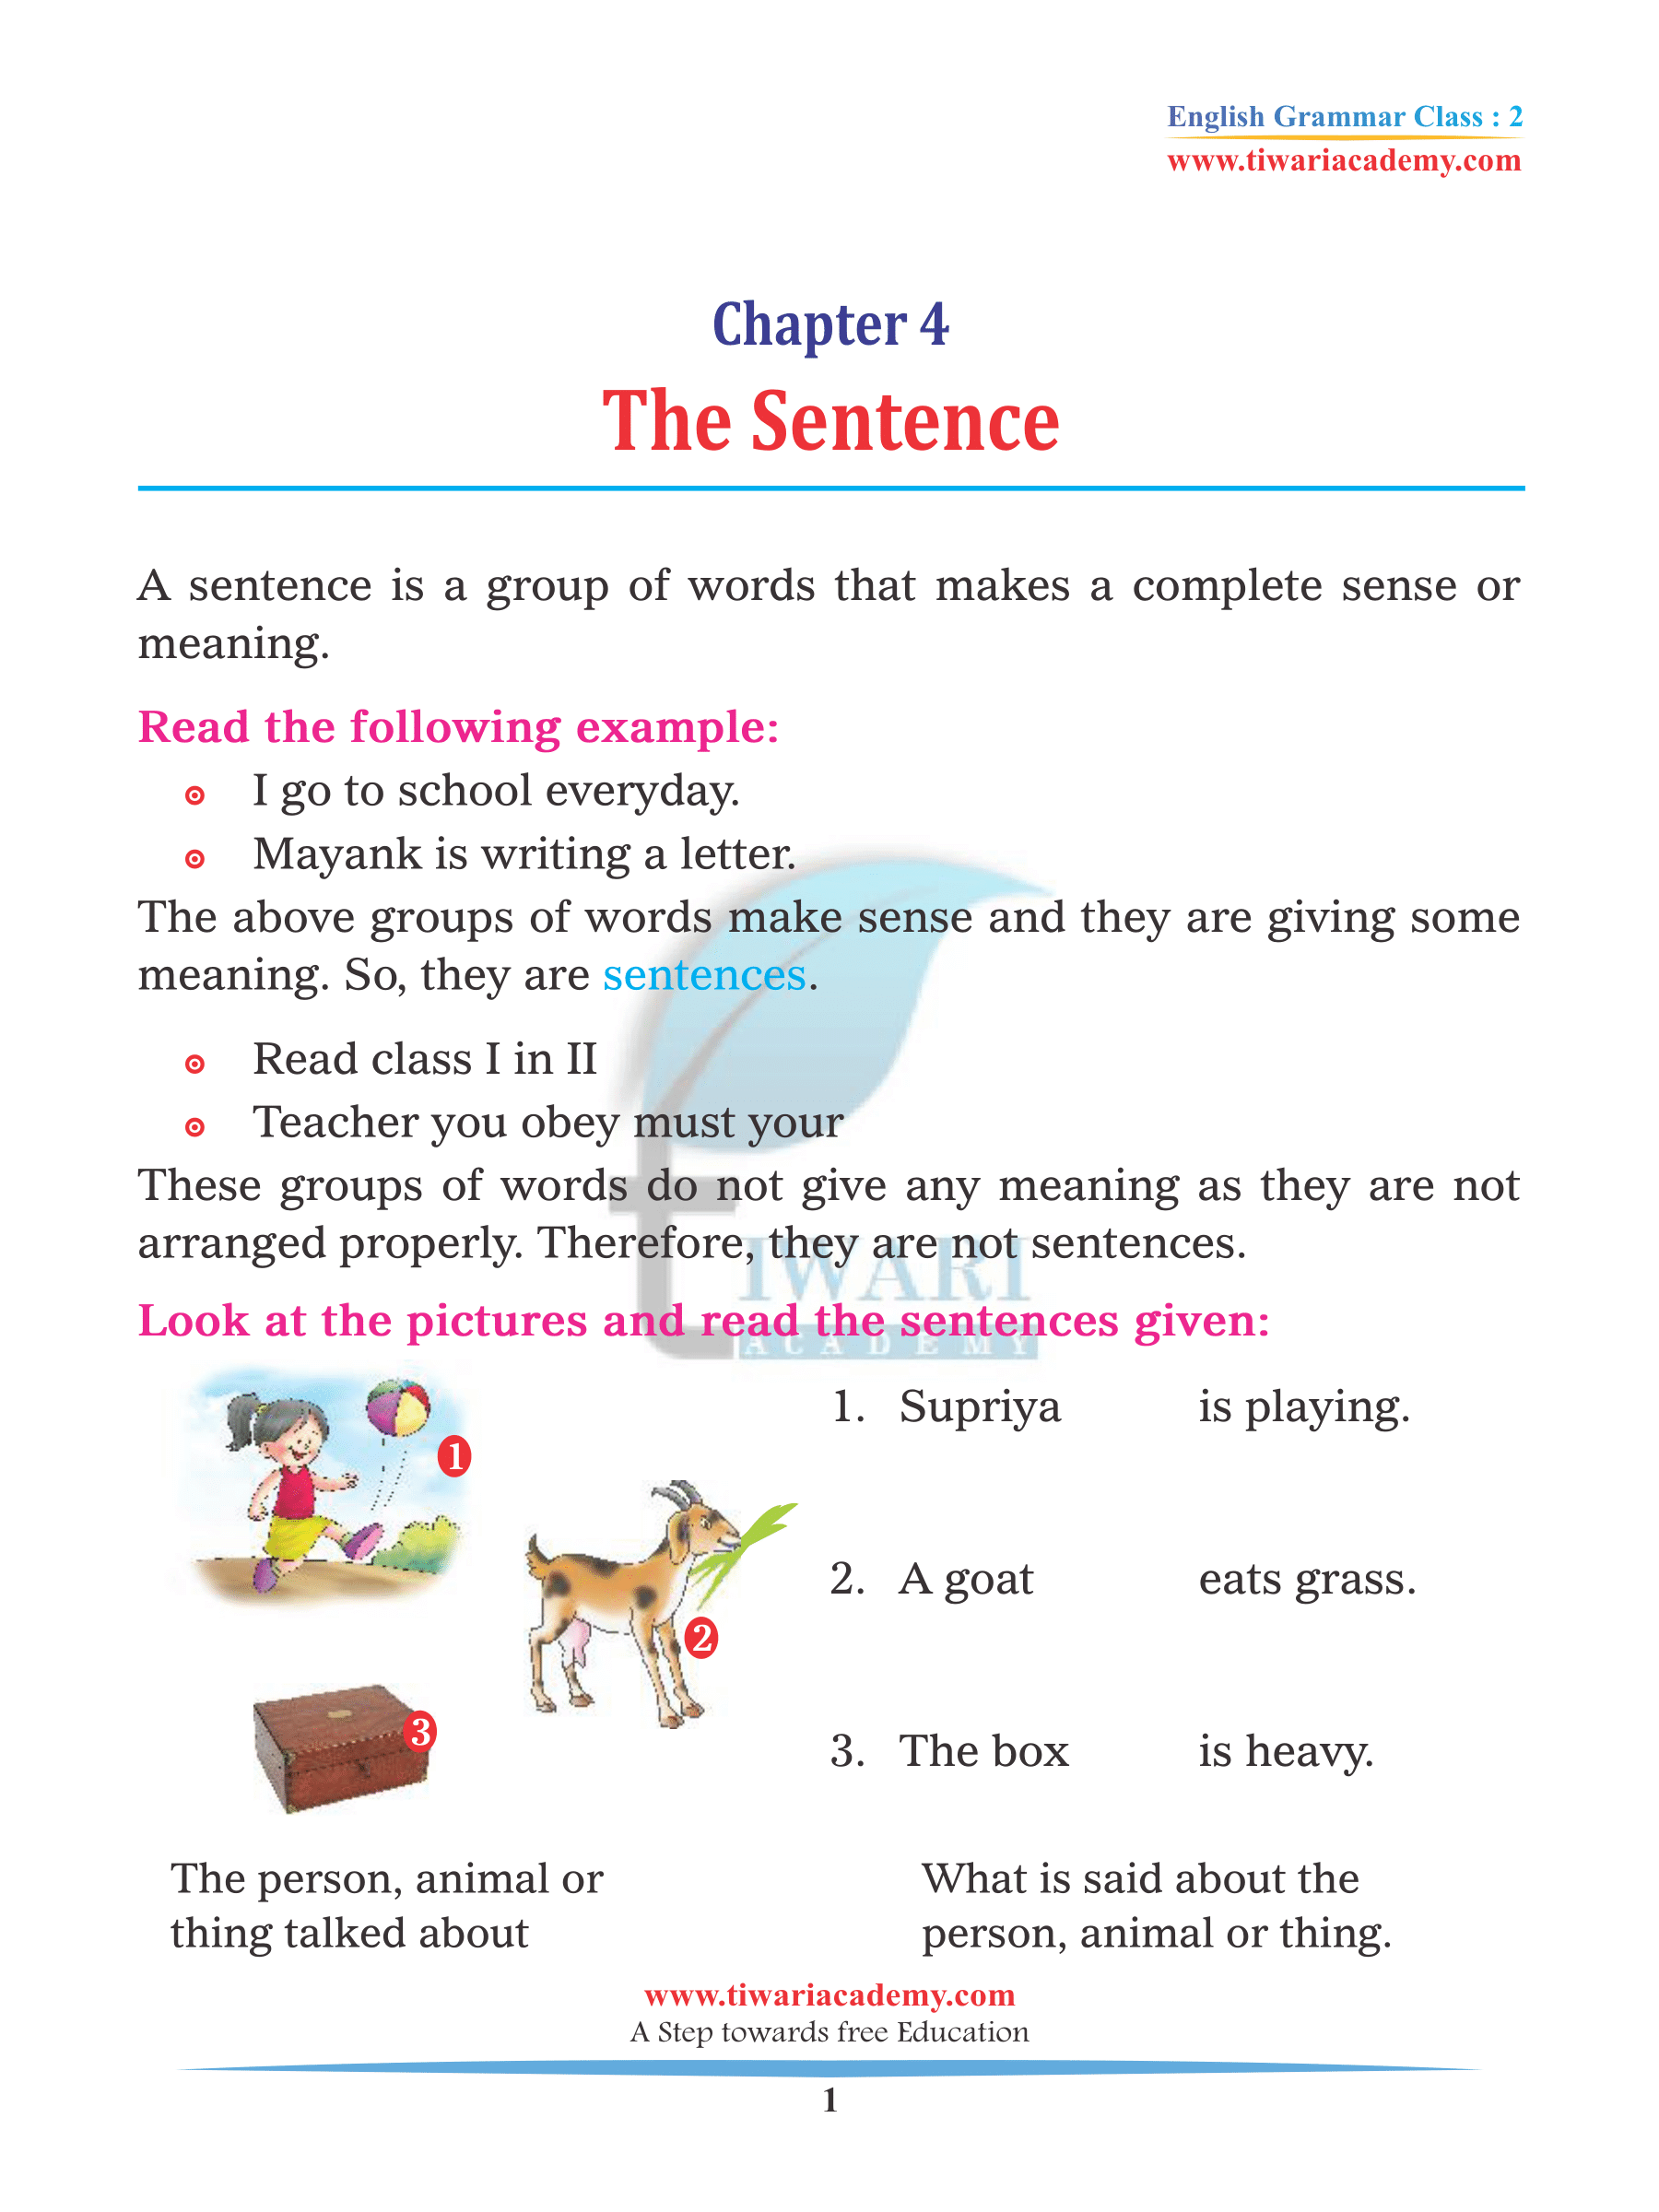 Class 2 English Grammar Chapter 4 the Sentence and Phrase